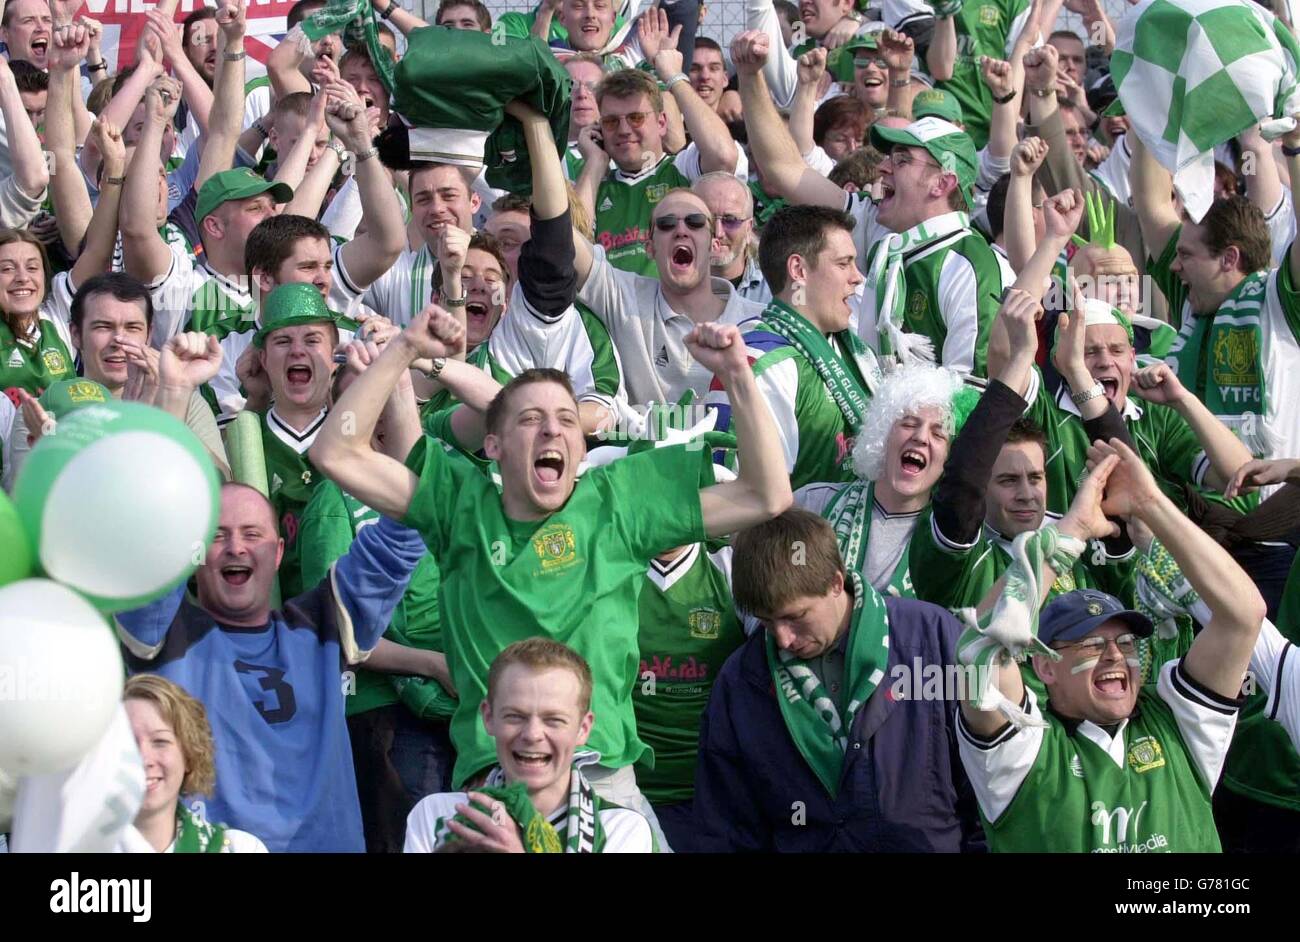 Yeovil supporters before their away game with Doncaster celebrate on hearing the news that Chester's draw with Woking guarantees their promotion to the Nationwide Football League before the Nationwide Conference match at Belle Veu, Doncaster. NO UNOFFICIAL CLUB WEBSITE USE. Stock Photo